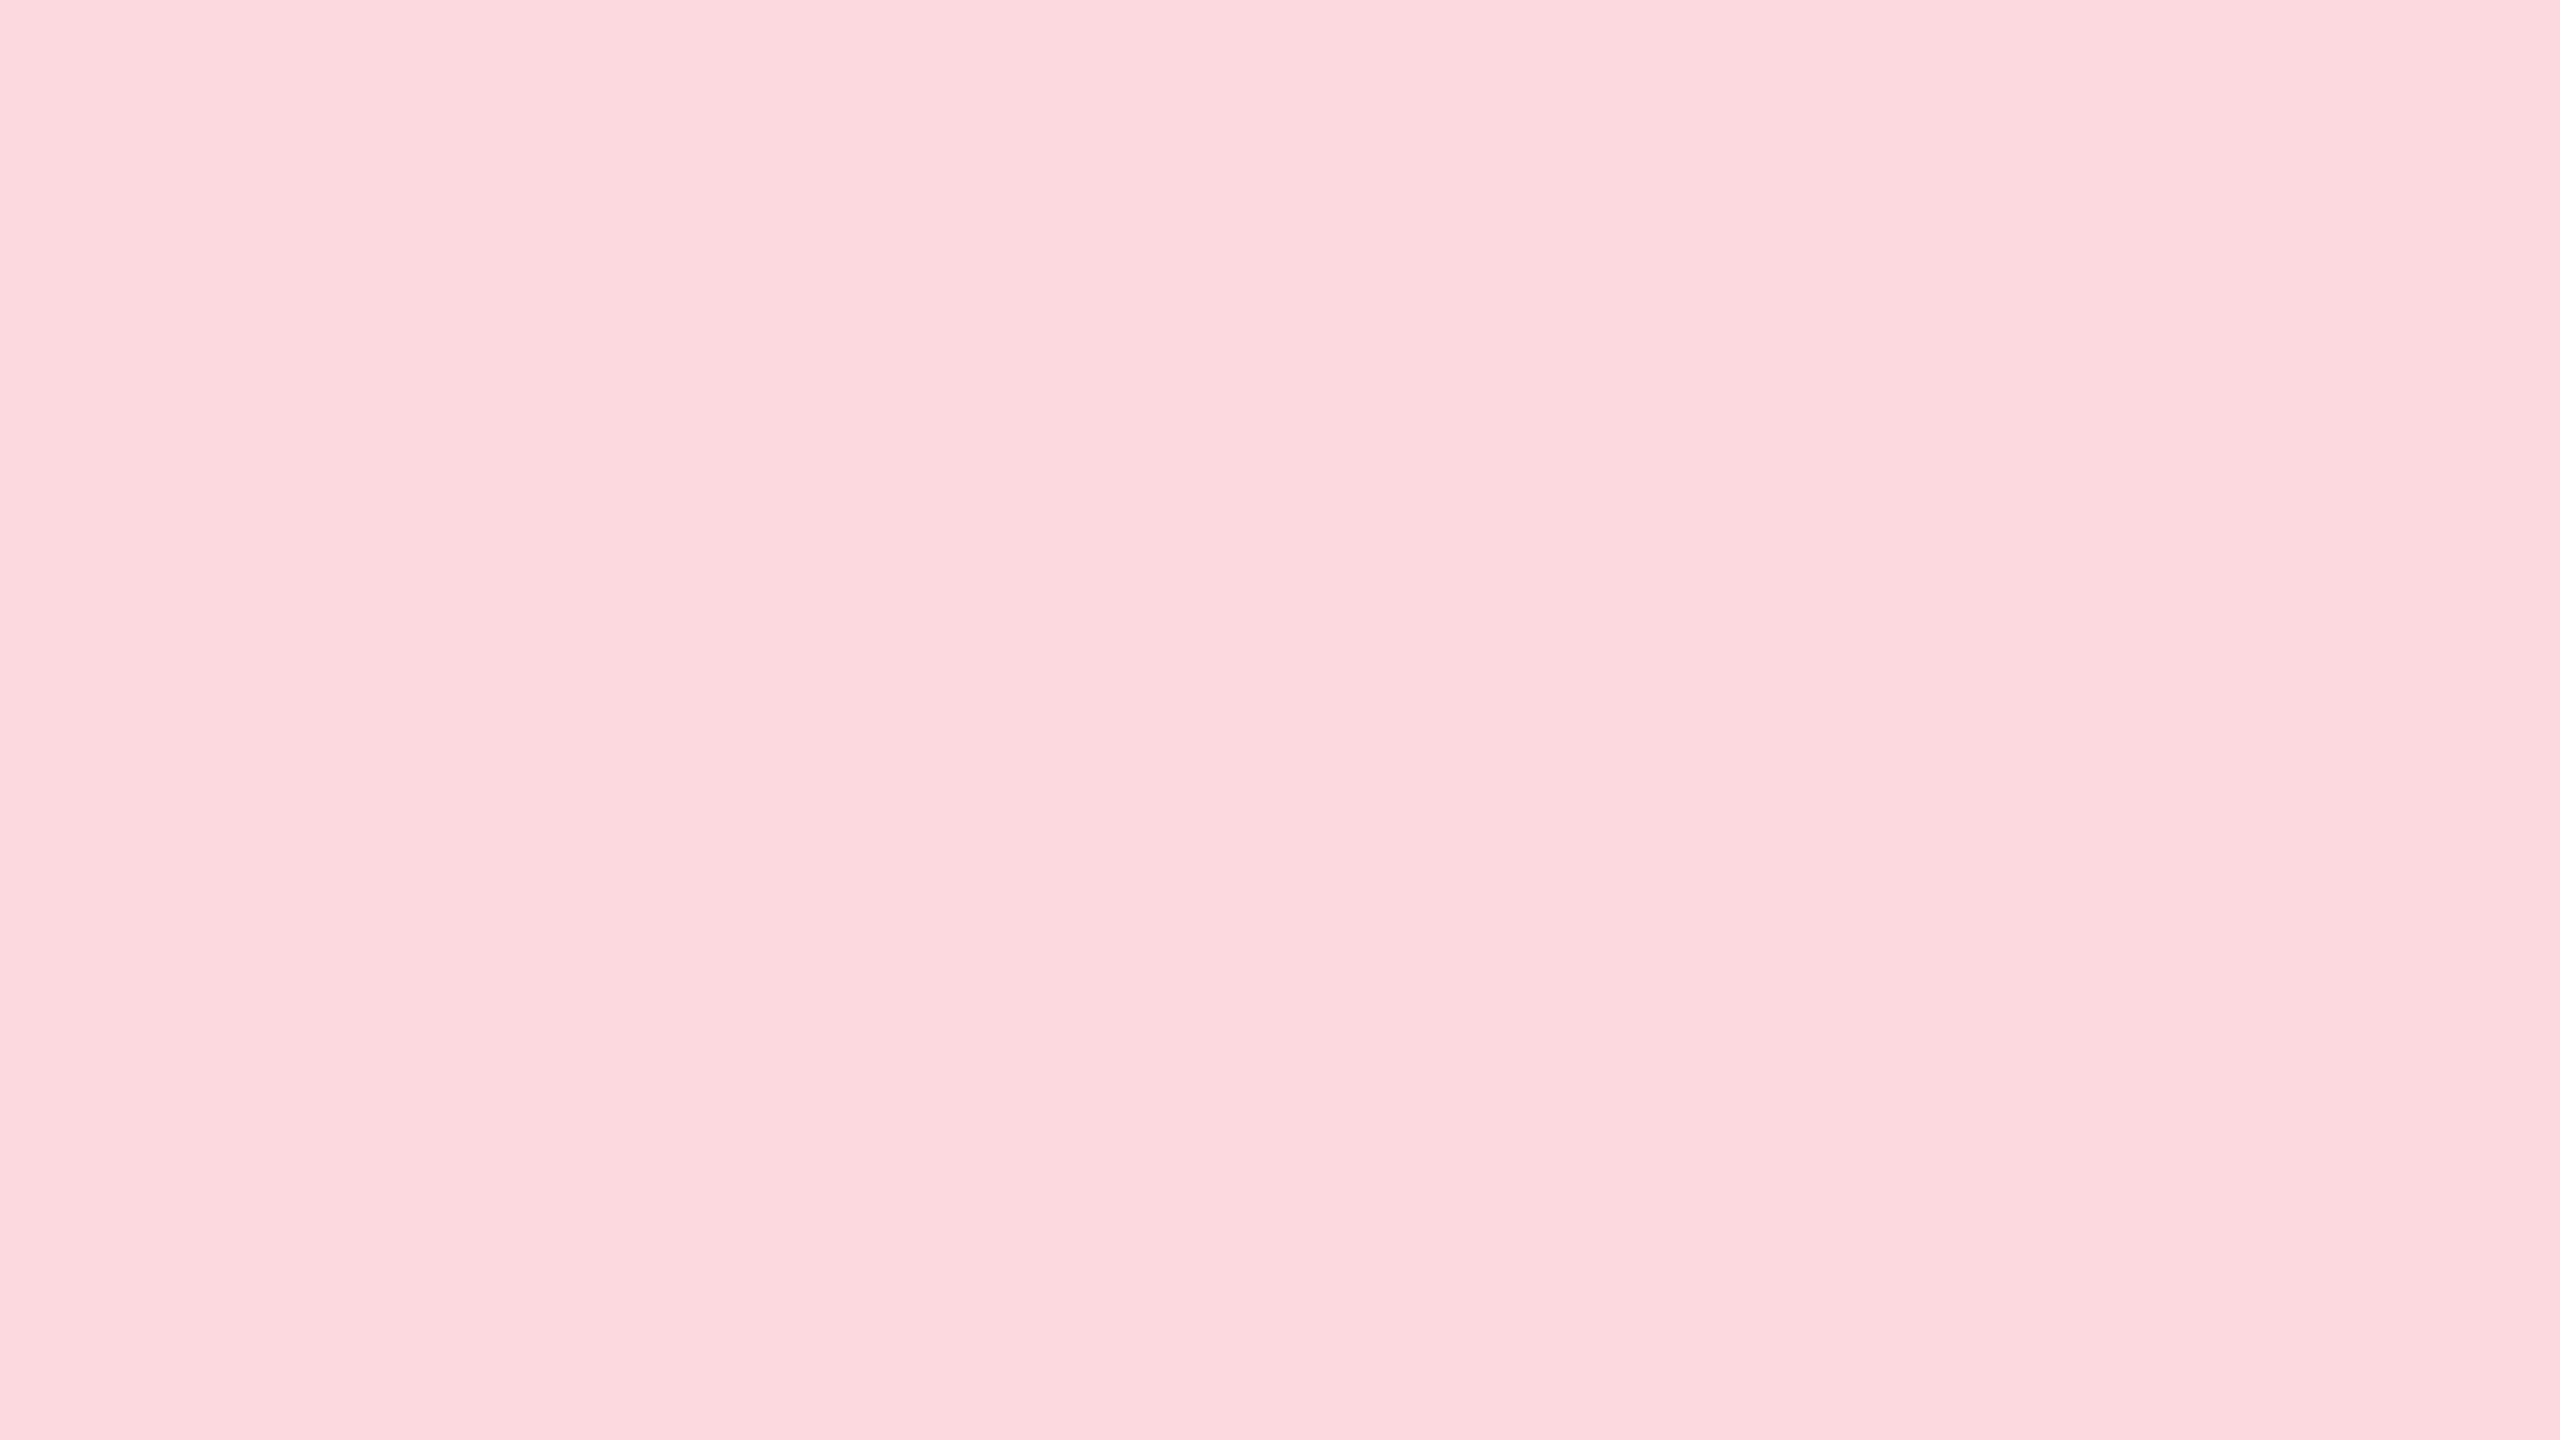  2560x1440 resolution Pale Pink solid color background view and